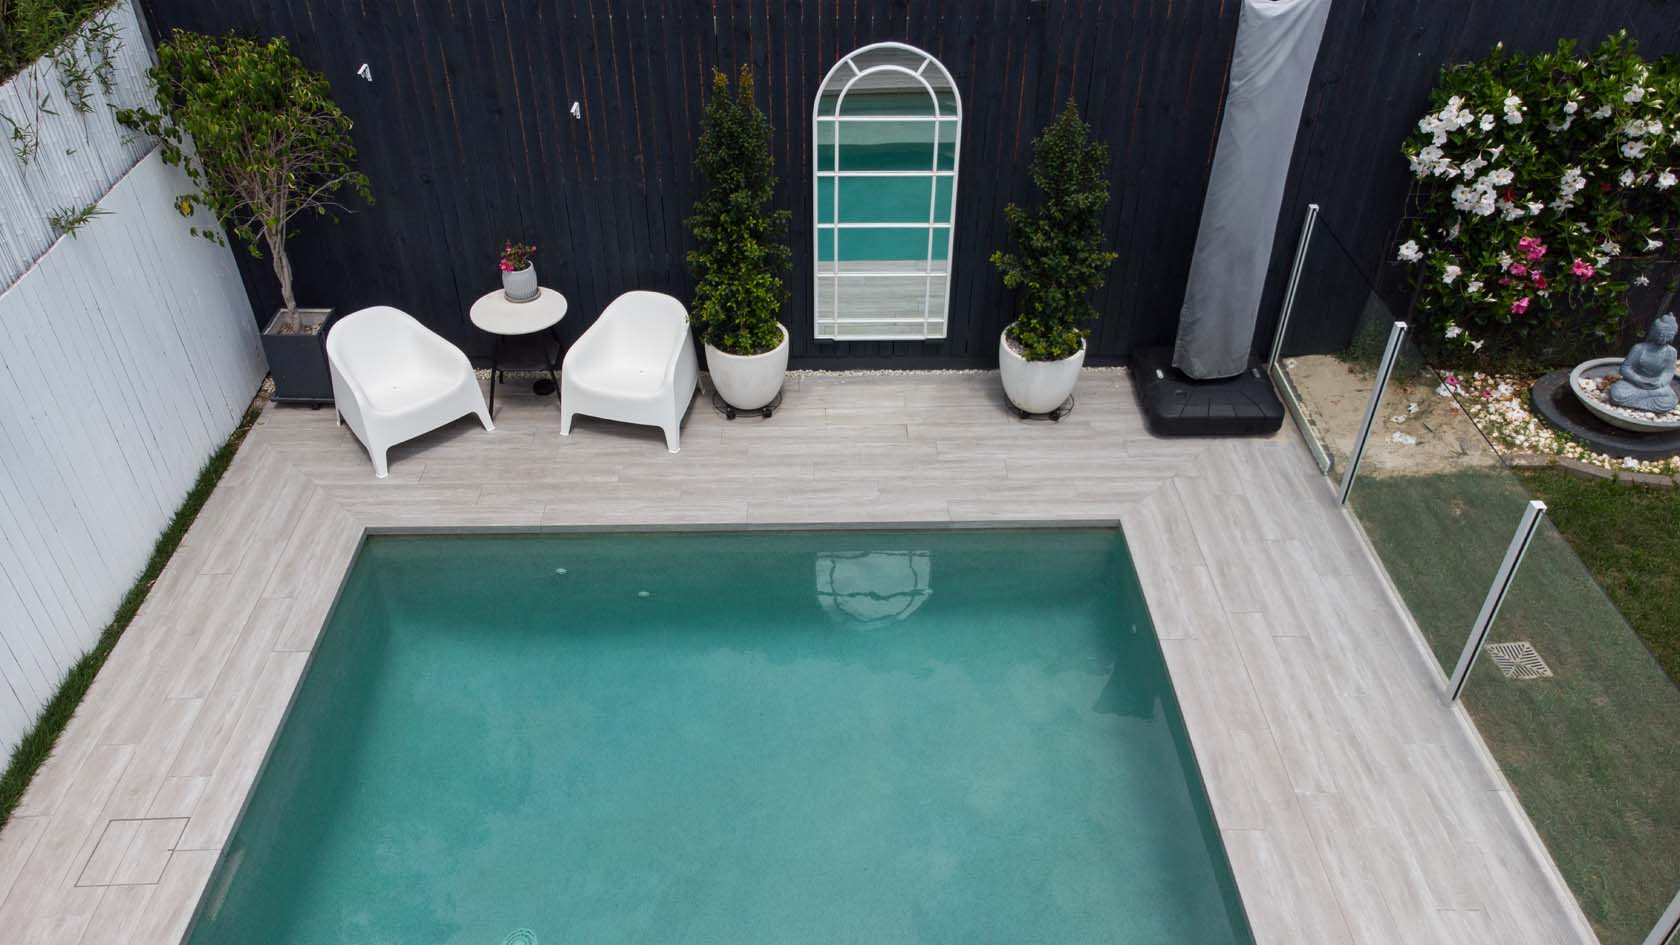 Silver Elm TileDeck pool coping and surround tiles